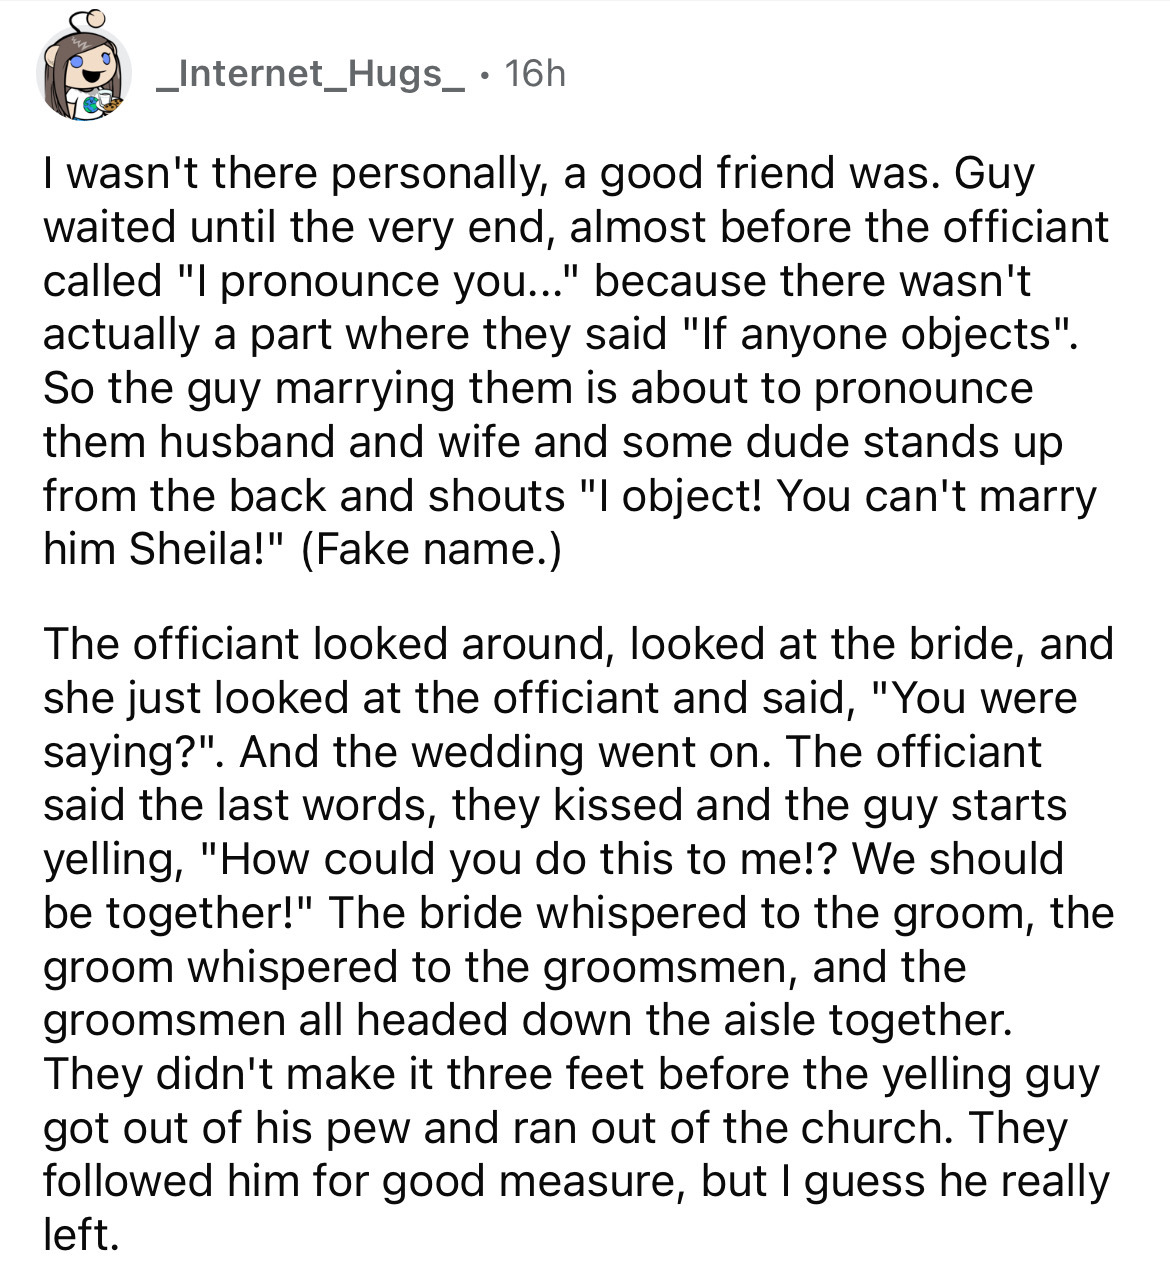 document - _Internet_Hugs_ 16h I wasn't there personally, a good friend was. Guy waited until the very end, almost before the officiant called "I pronounce you..." because there wasn't actually a part where they said "If anyone objects". So the guy marryi